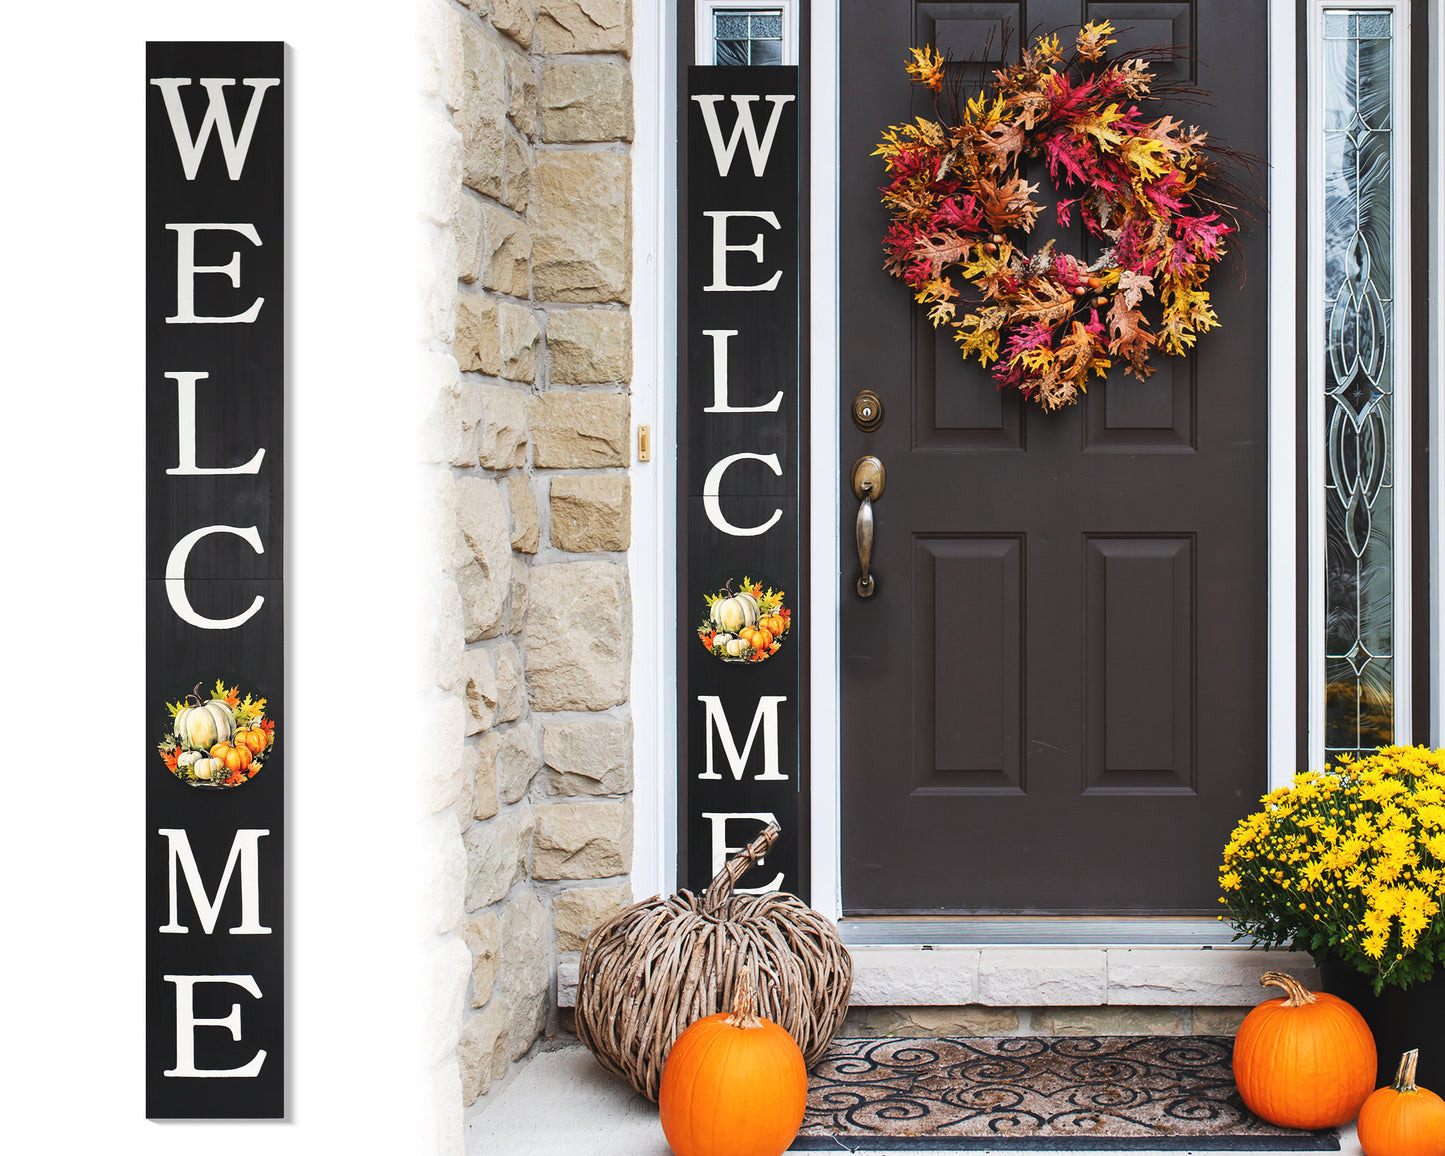 72in "Welcome" Fall Porch Sign with Pumpkins Design - Black Porch Board Decor for Front Door during Autumn and Thanksgiving Celebrations